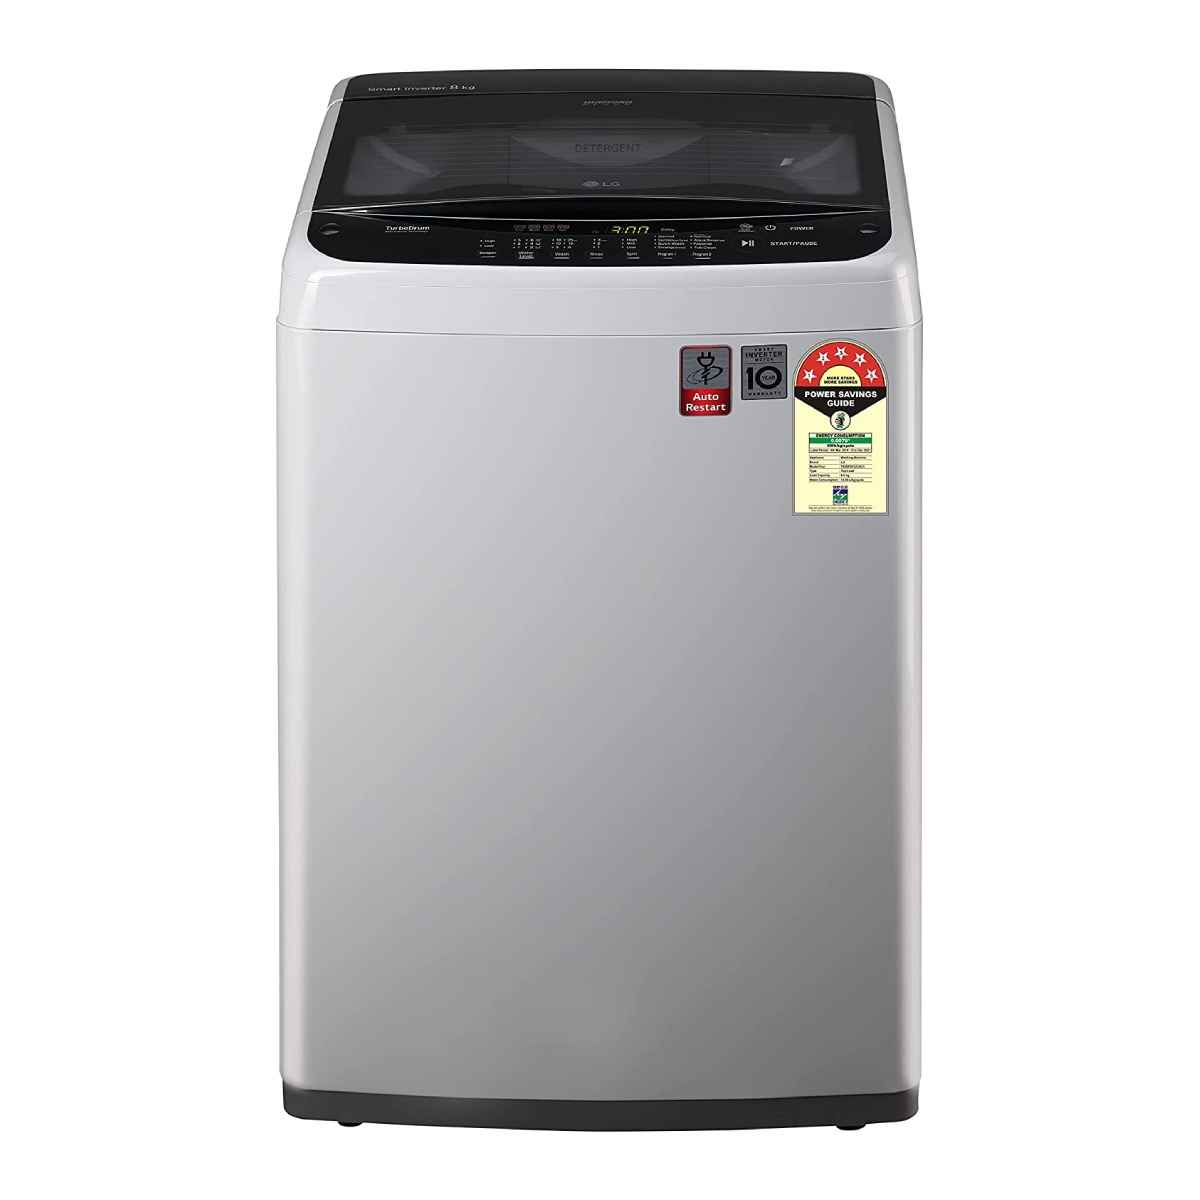 LG 8.0 Kg Fully-Automatic Top Loading Washing Machine (T80SPSF2Z)